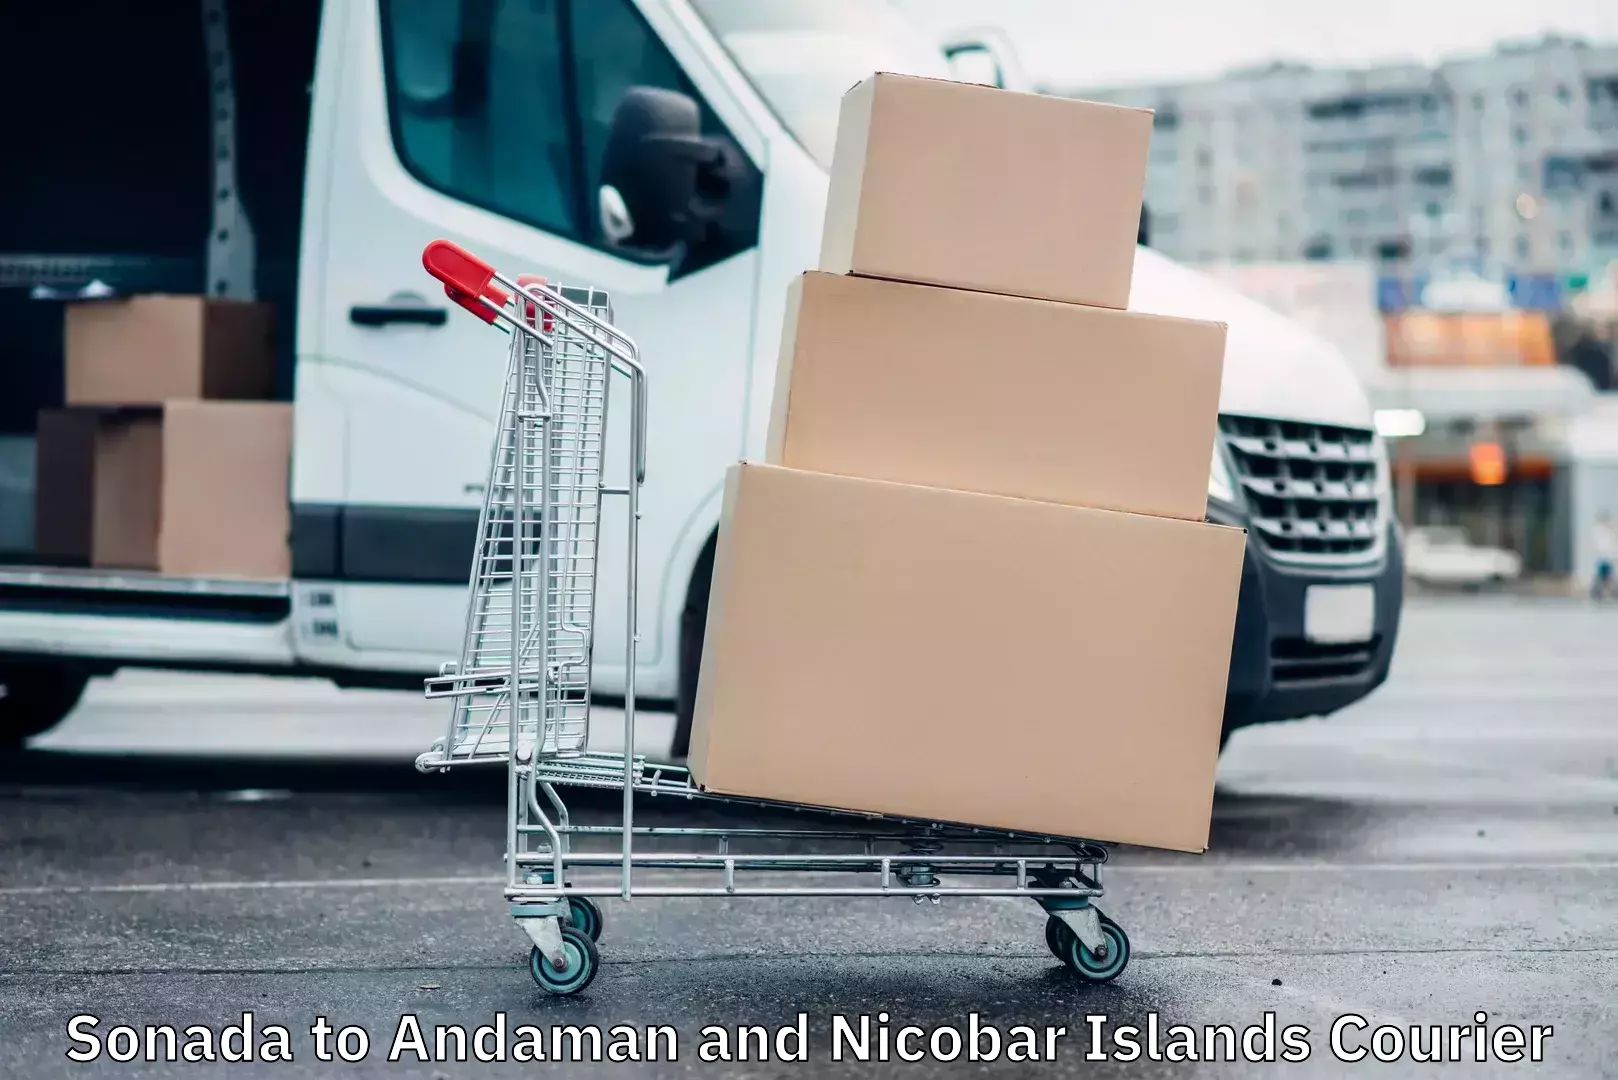 Modern delivery technologies Sonada to Andaman and Nicobar Islands